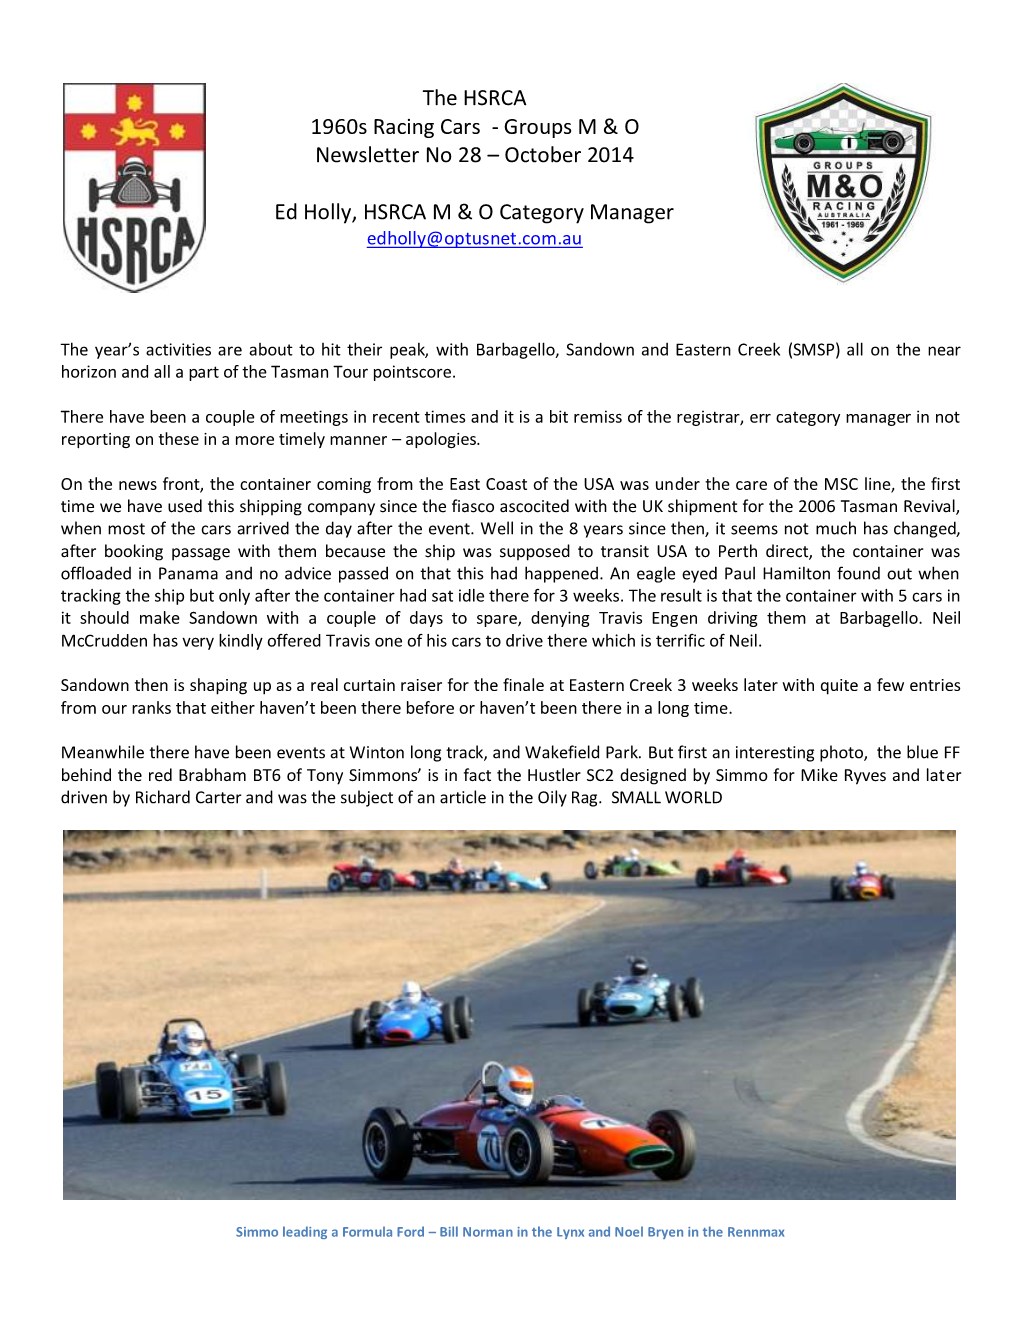 The HSRCA 1960S Racing Cars - Groups M & O Newsletter No 28 – October 2014